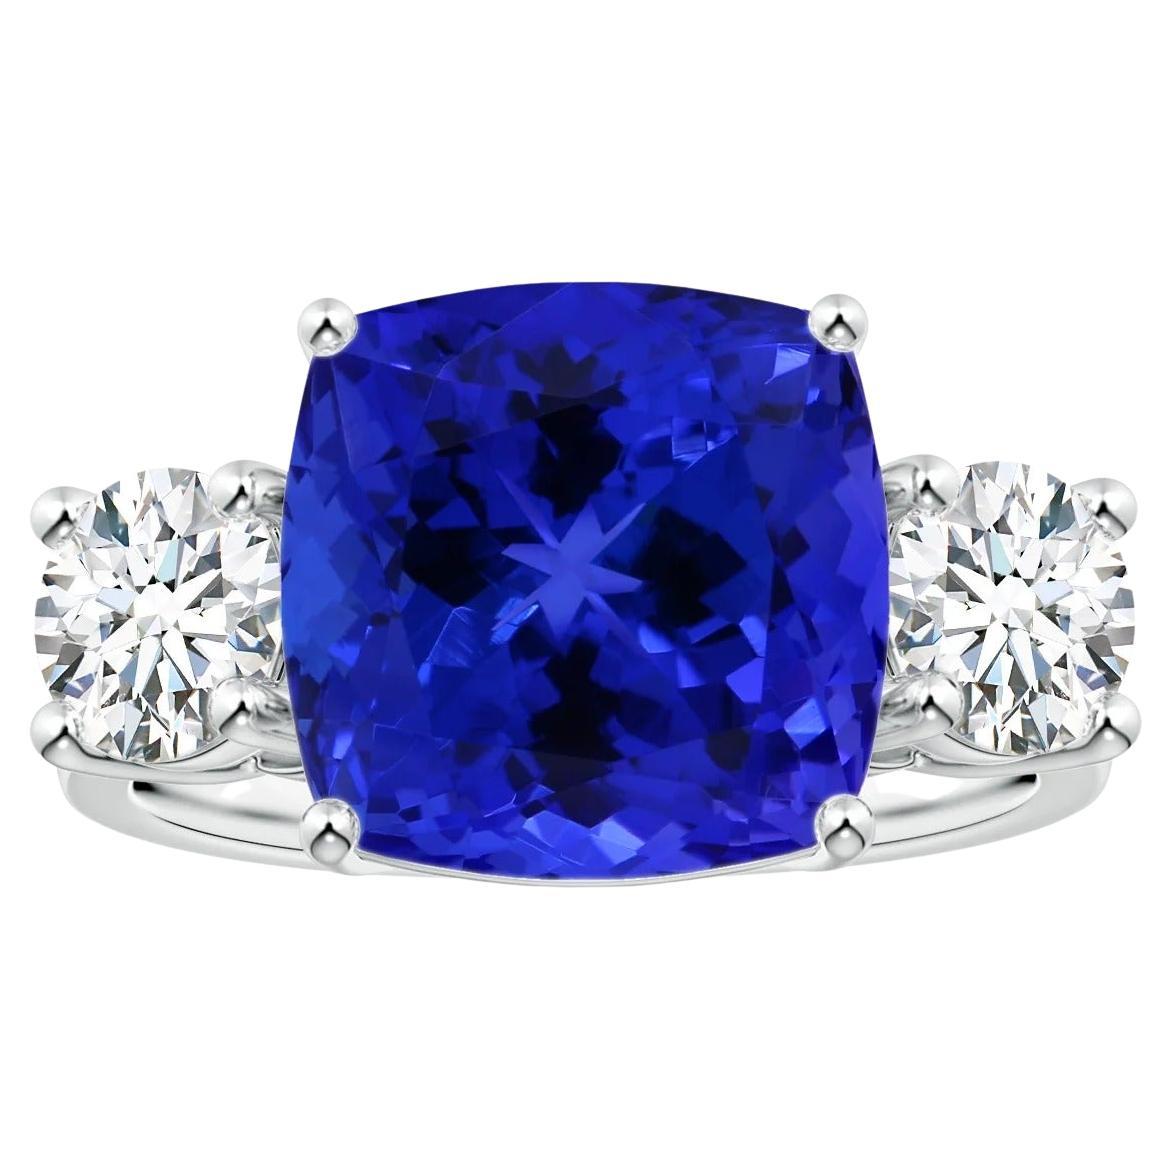 For Sale:  Angara Gia Certified Natural Tanzanite 3-Stone Ring in White Gold with Diamonds